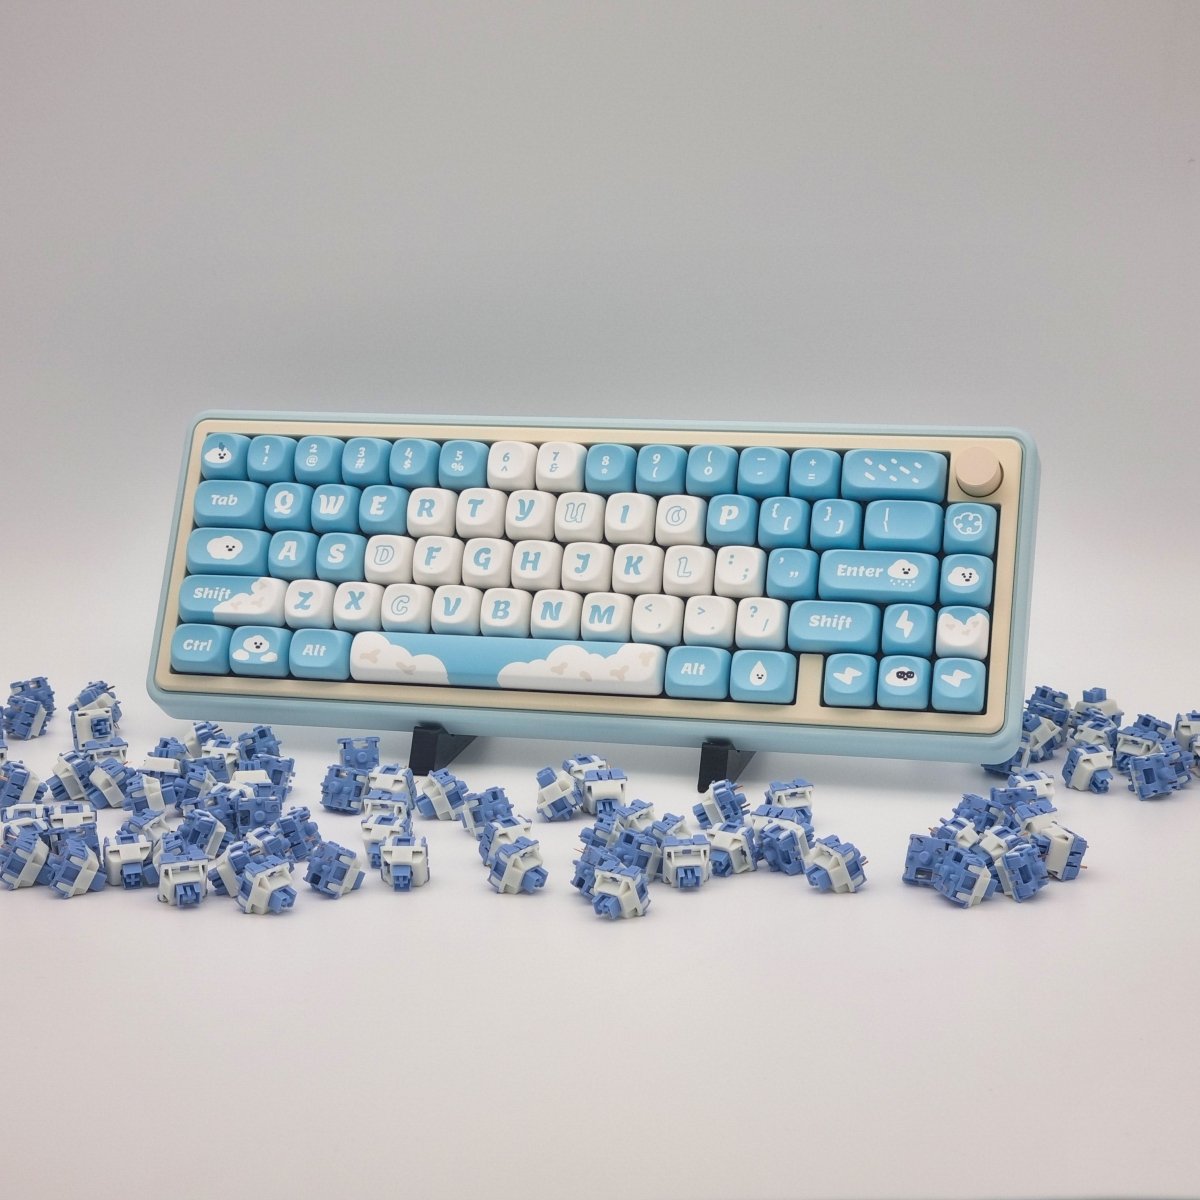 The Click and Clack of Mechanical Switches – The KapCo